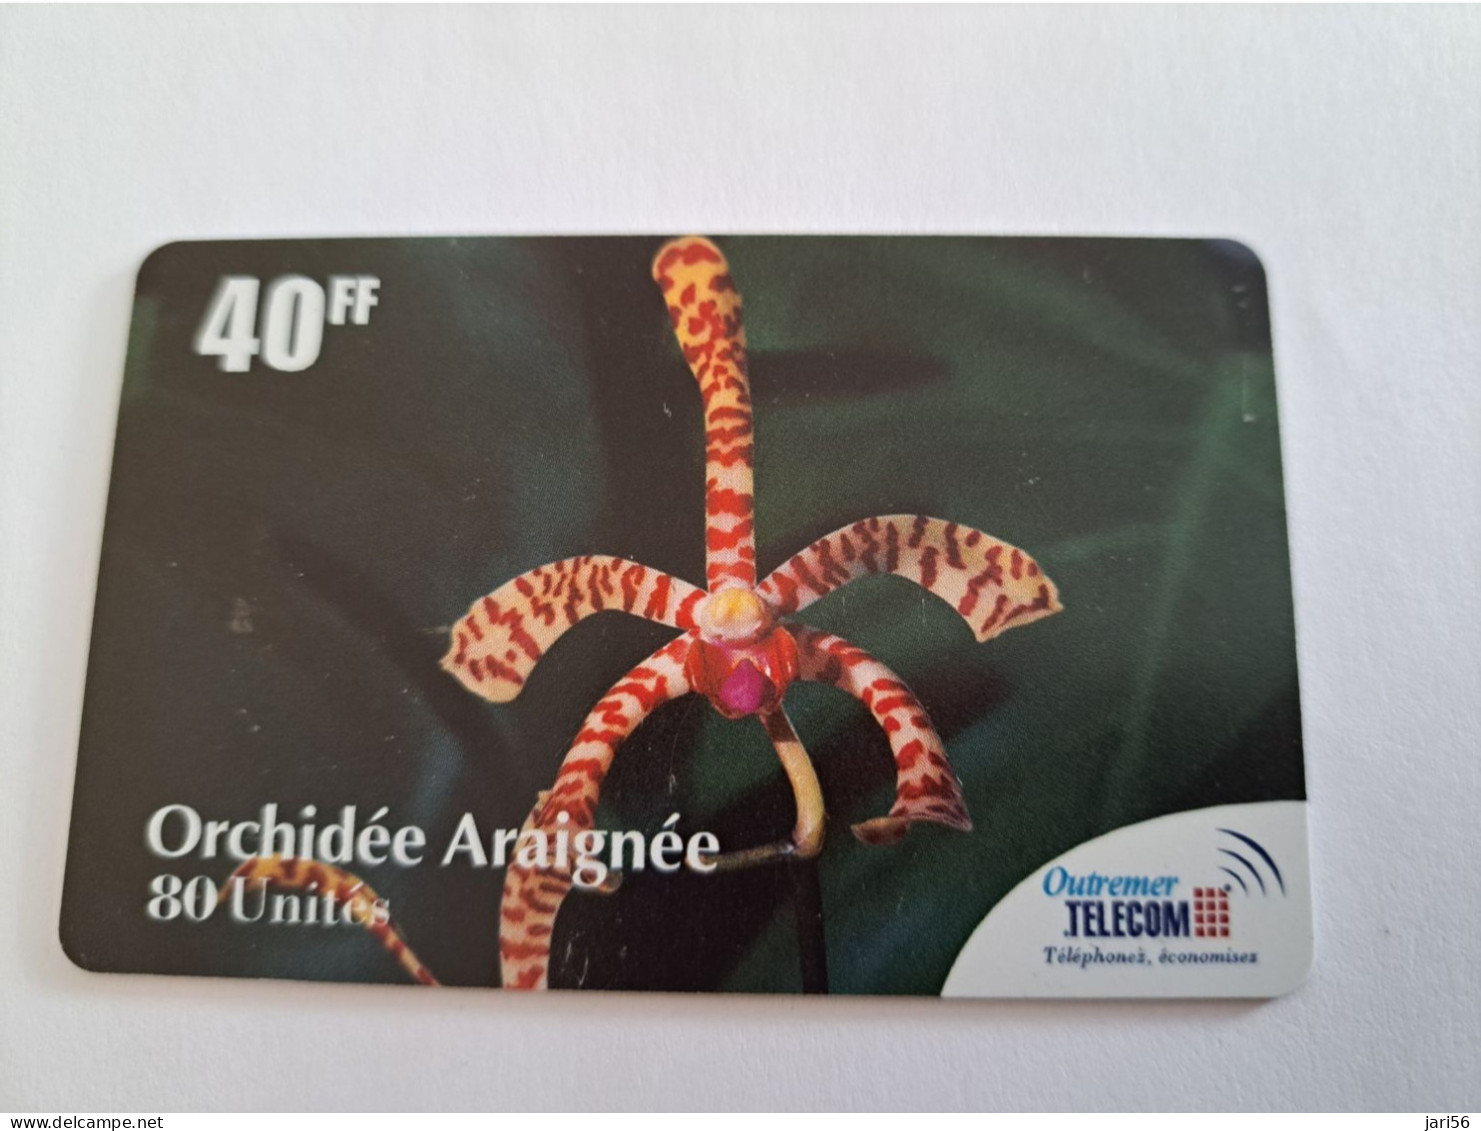 ST MARTIN  / OUTREMER/ FLOWERS/ ORCHIDEE ARAIGNEE   / 40 FF/ 80  UNITS / ANTF-OT51  FINE USED CARD    ** 13919 ** - Antille (Francesi)